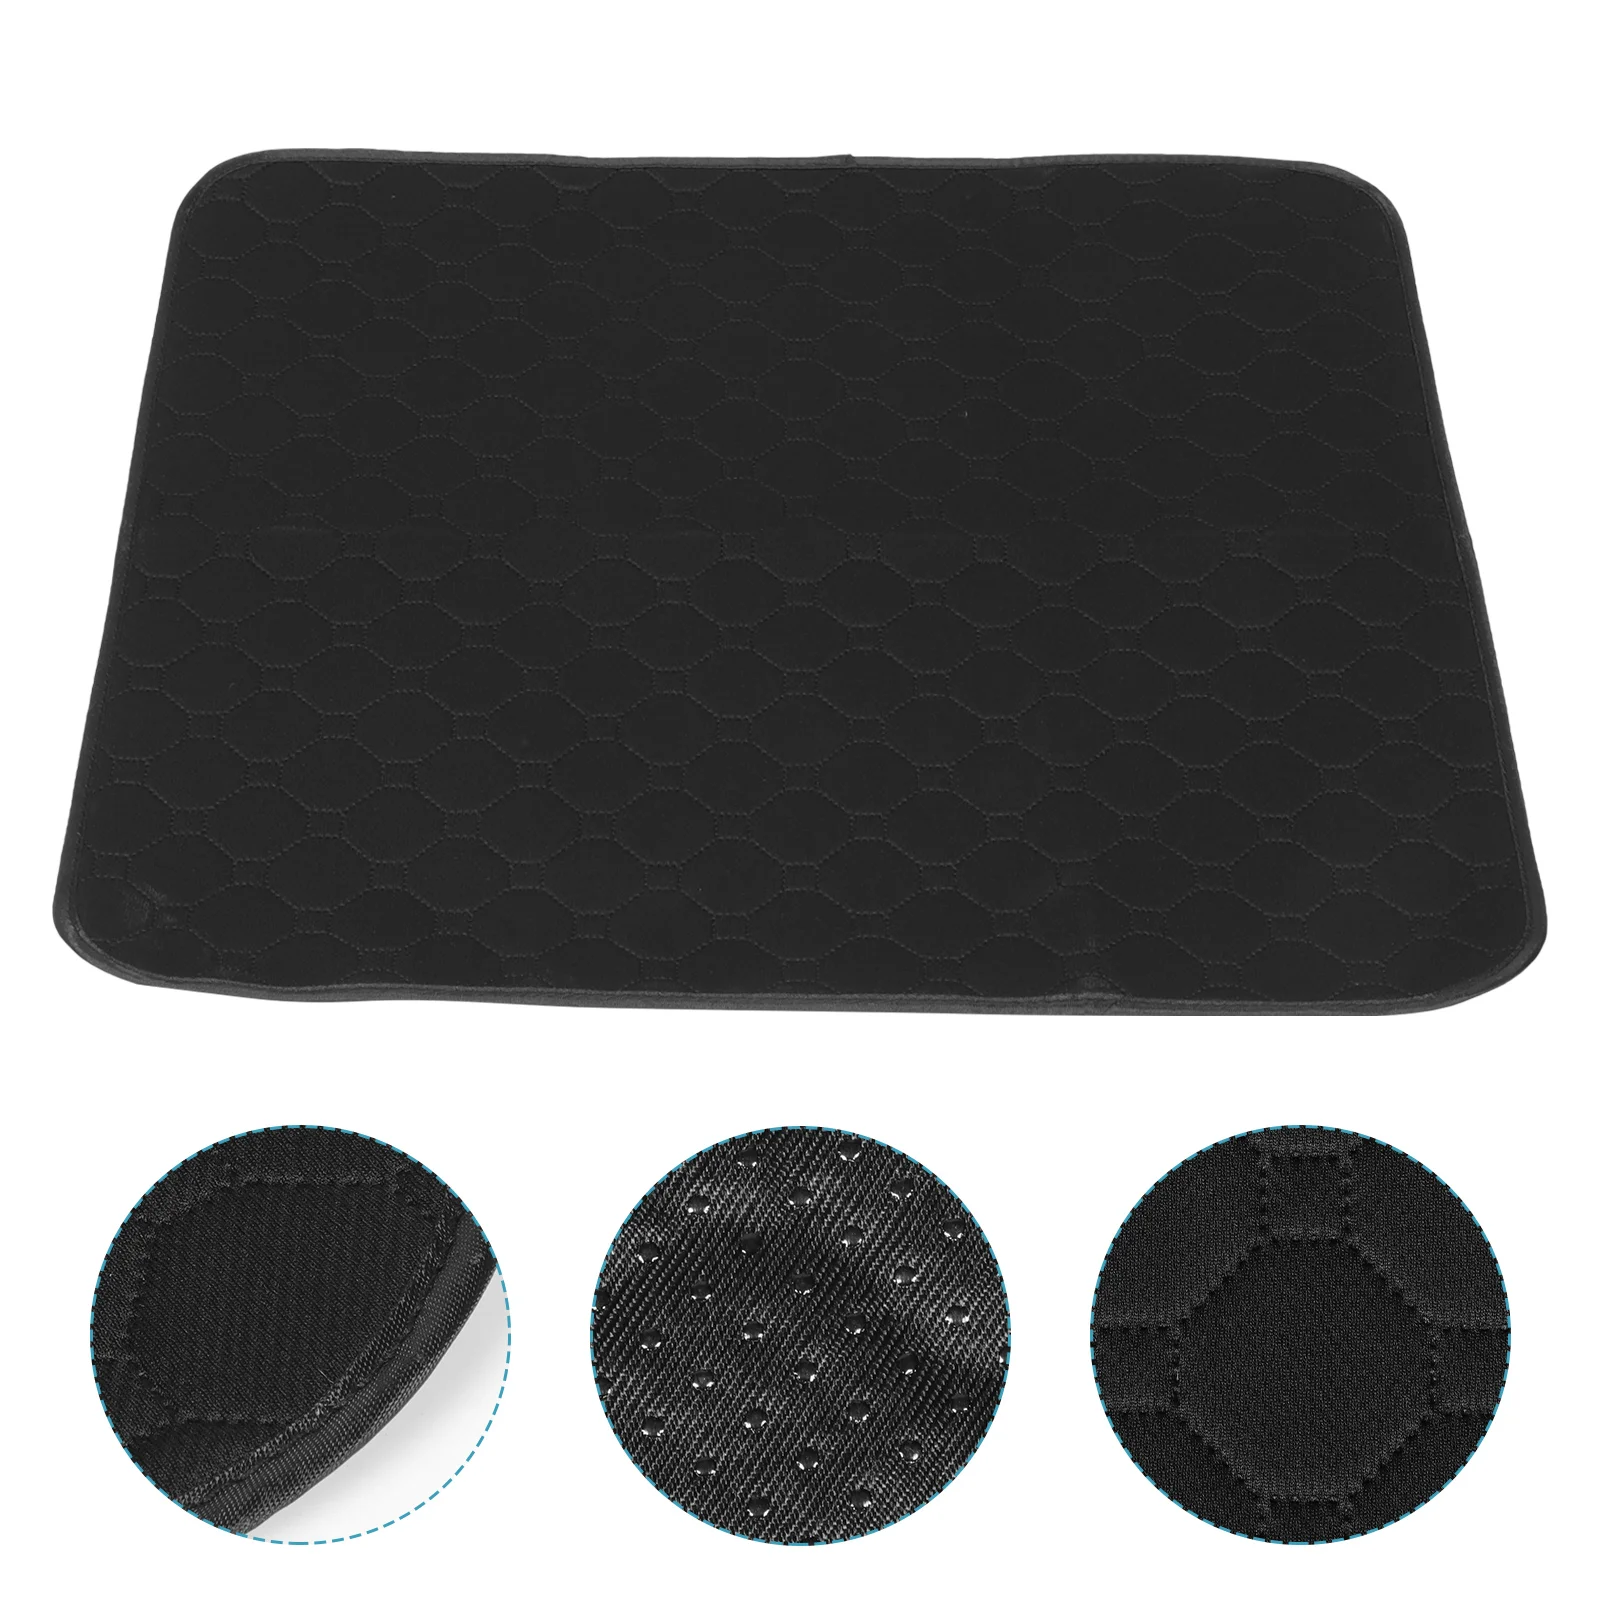 Couch Mattress Reusable Pads Cover Car Protector Piddle Pad Carseats Wheelchair Incontinence Pads Absorbent Pads